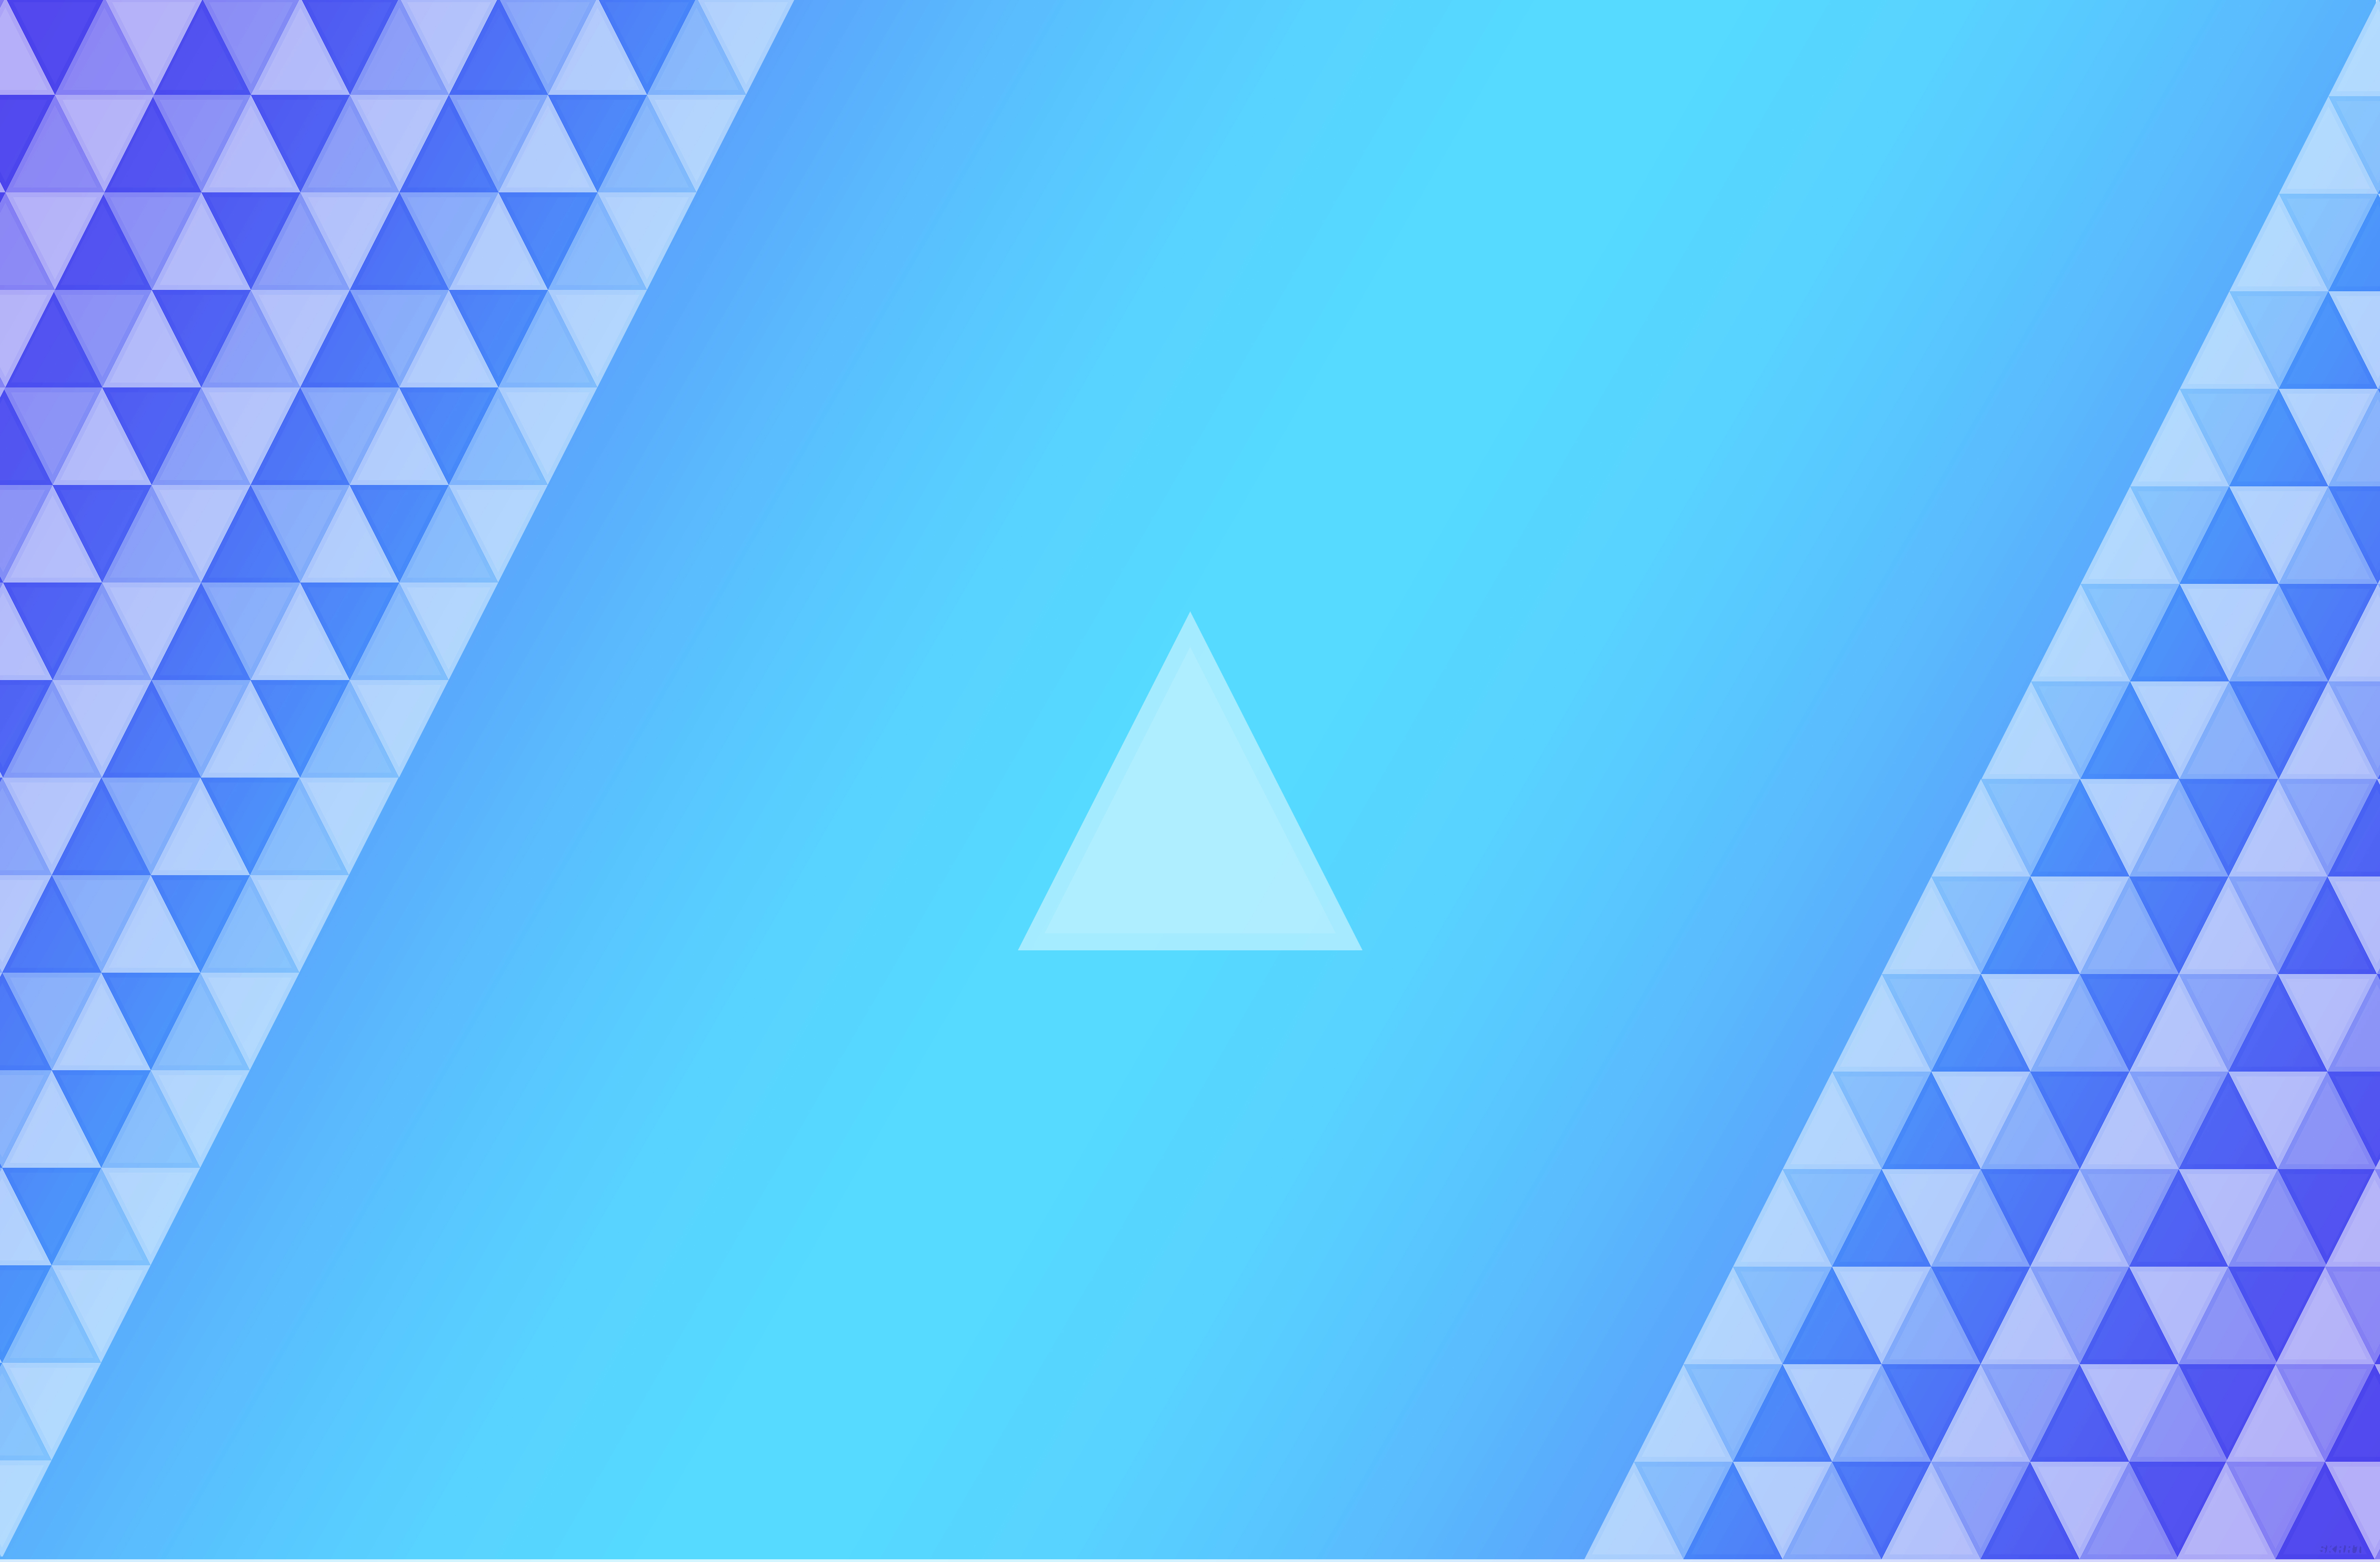 General 7000x4594 blue triangle geometric figures digital art blue background abstract minimalism simple background